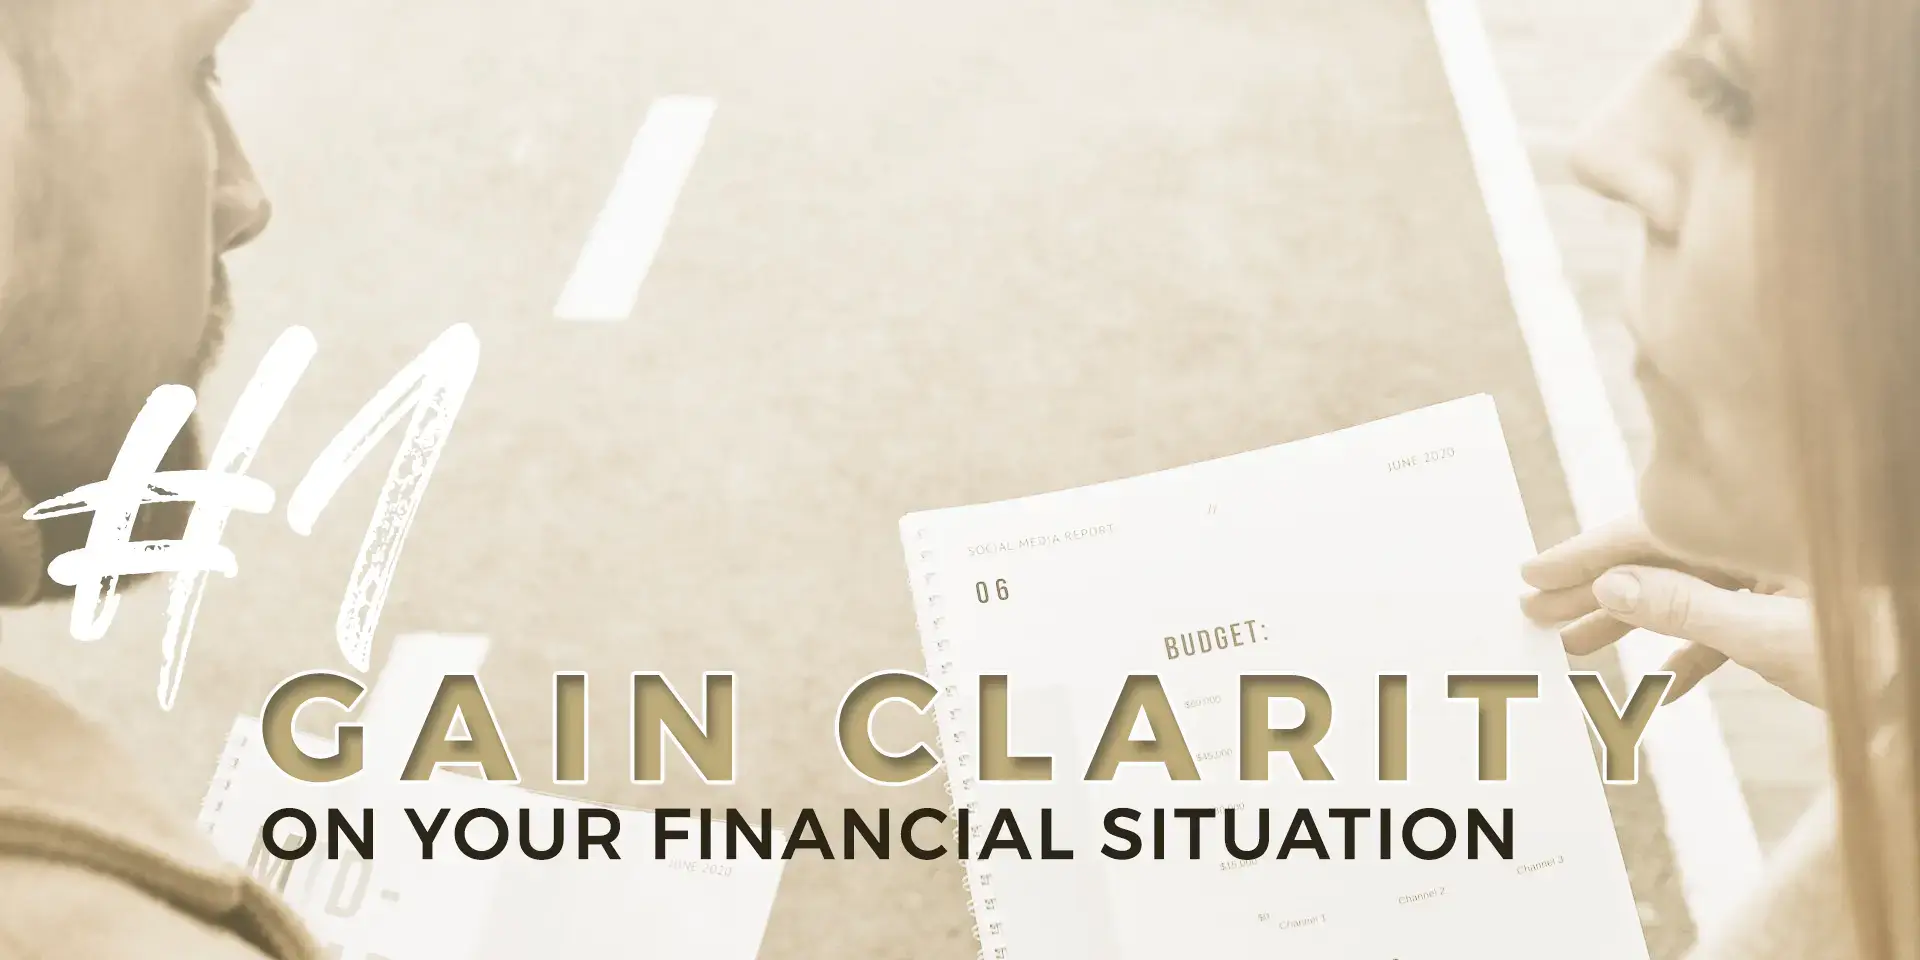 Tip #1: Gain Clarity on Your Financial Situation